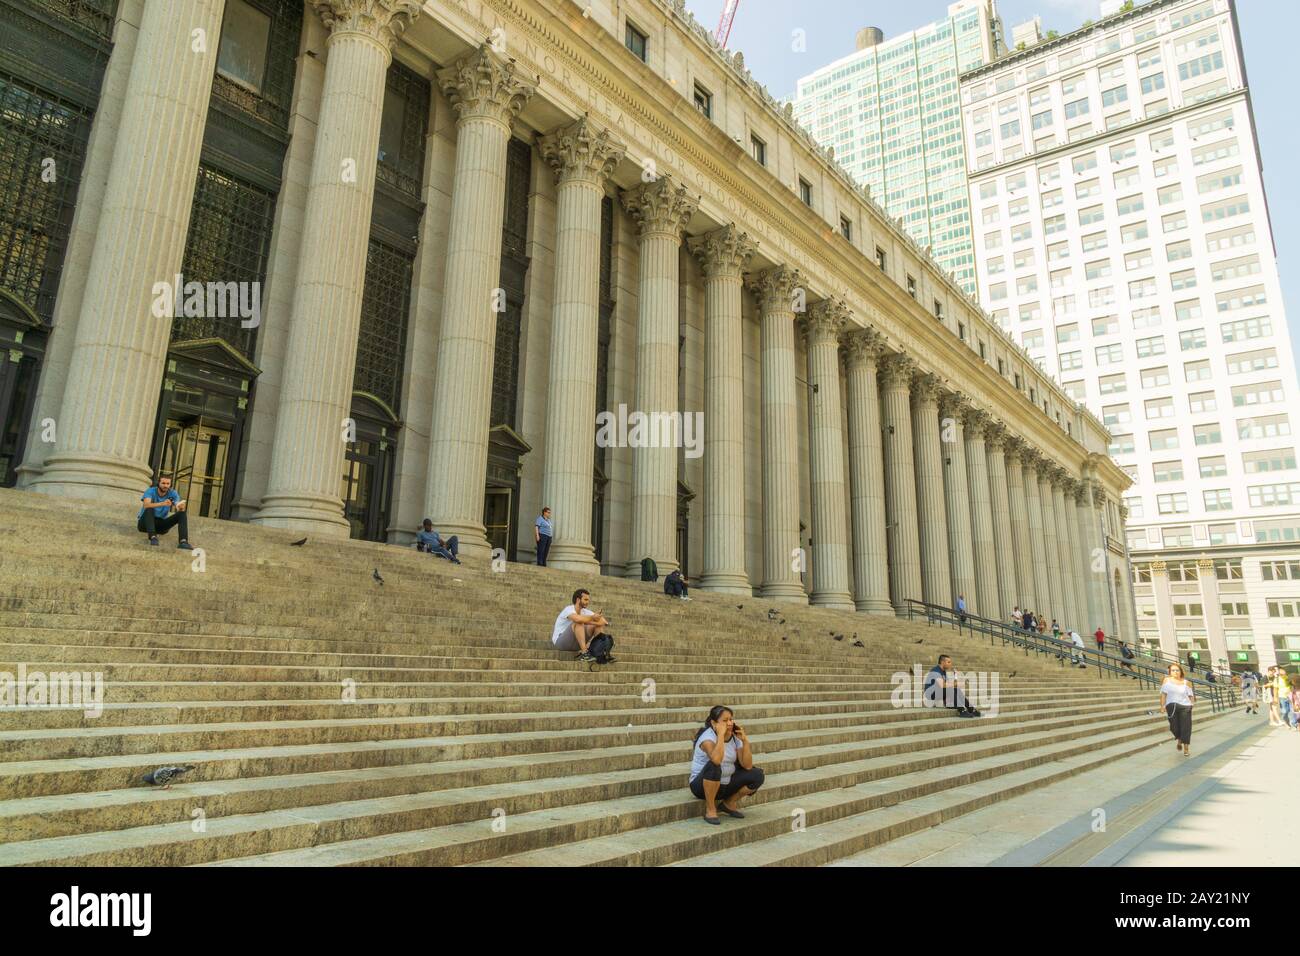 New York, USA - August 20, 2018: James A. Farley Post Office Building once held the distinction of being the only Post Office in NYC open 24/7. The bu Stock Photo